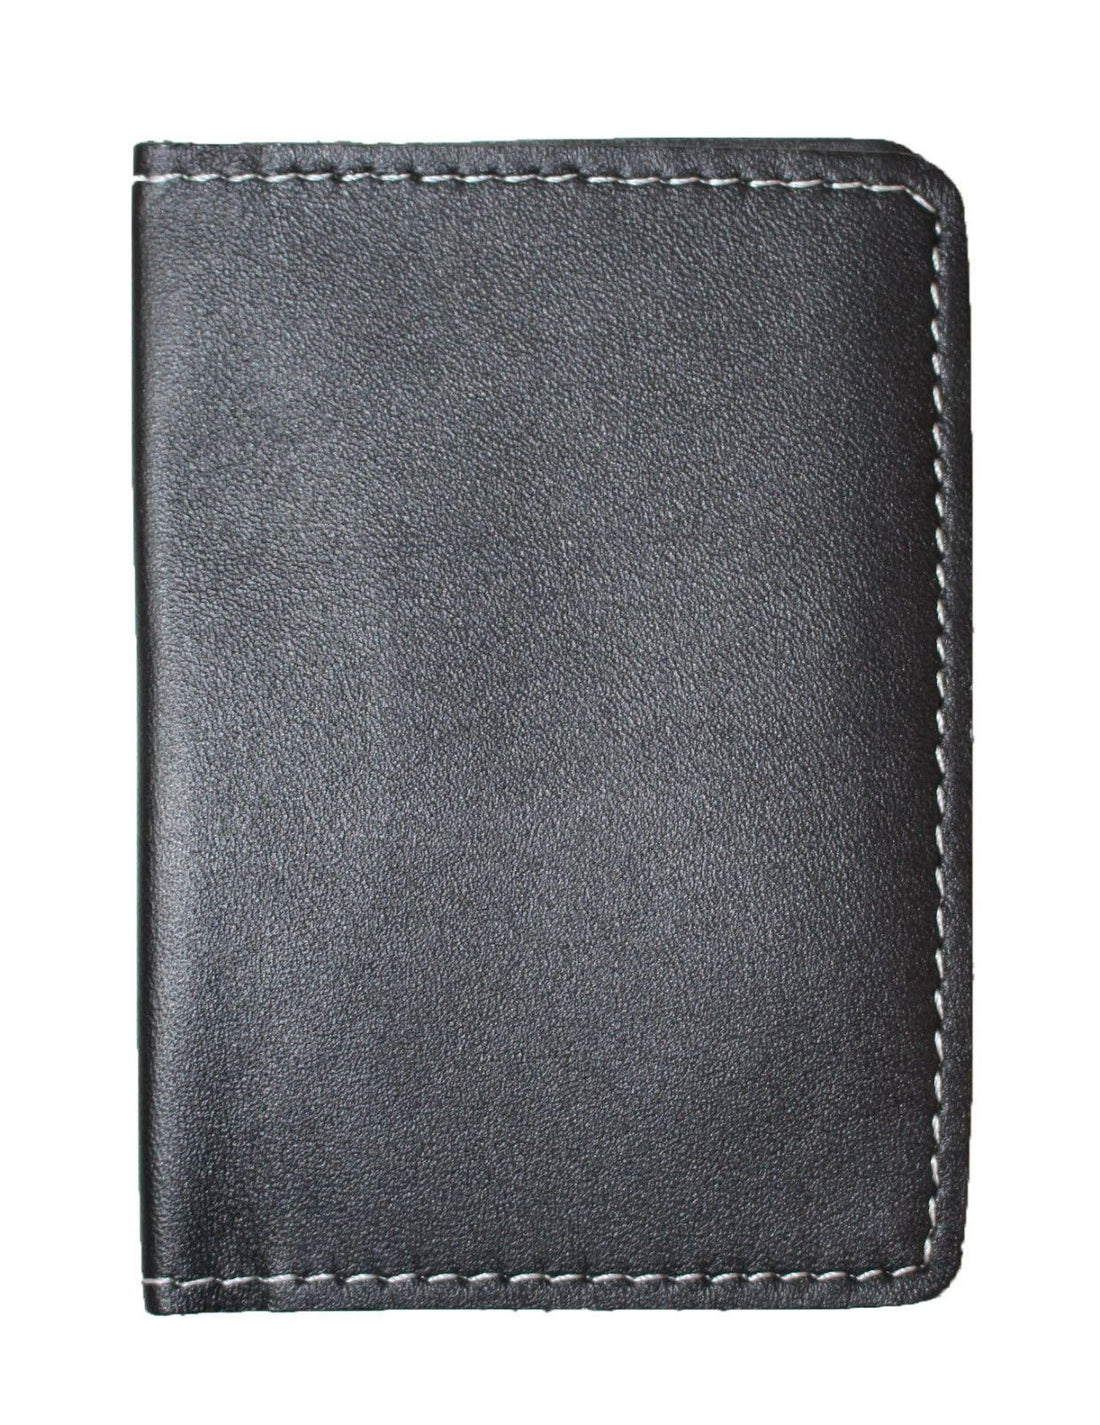 100% Genuine Real Leather Top Quality Unisex Mini Slim Wallet Credit Card Holder